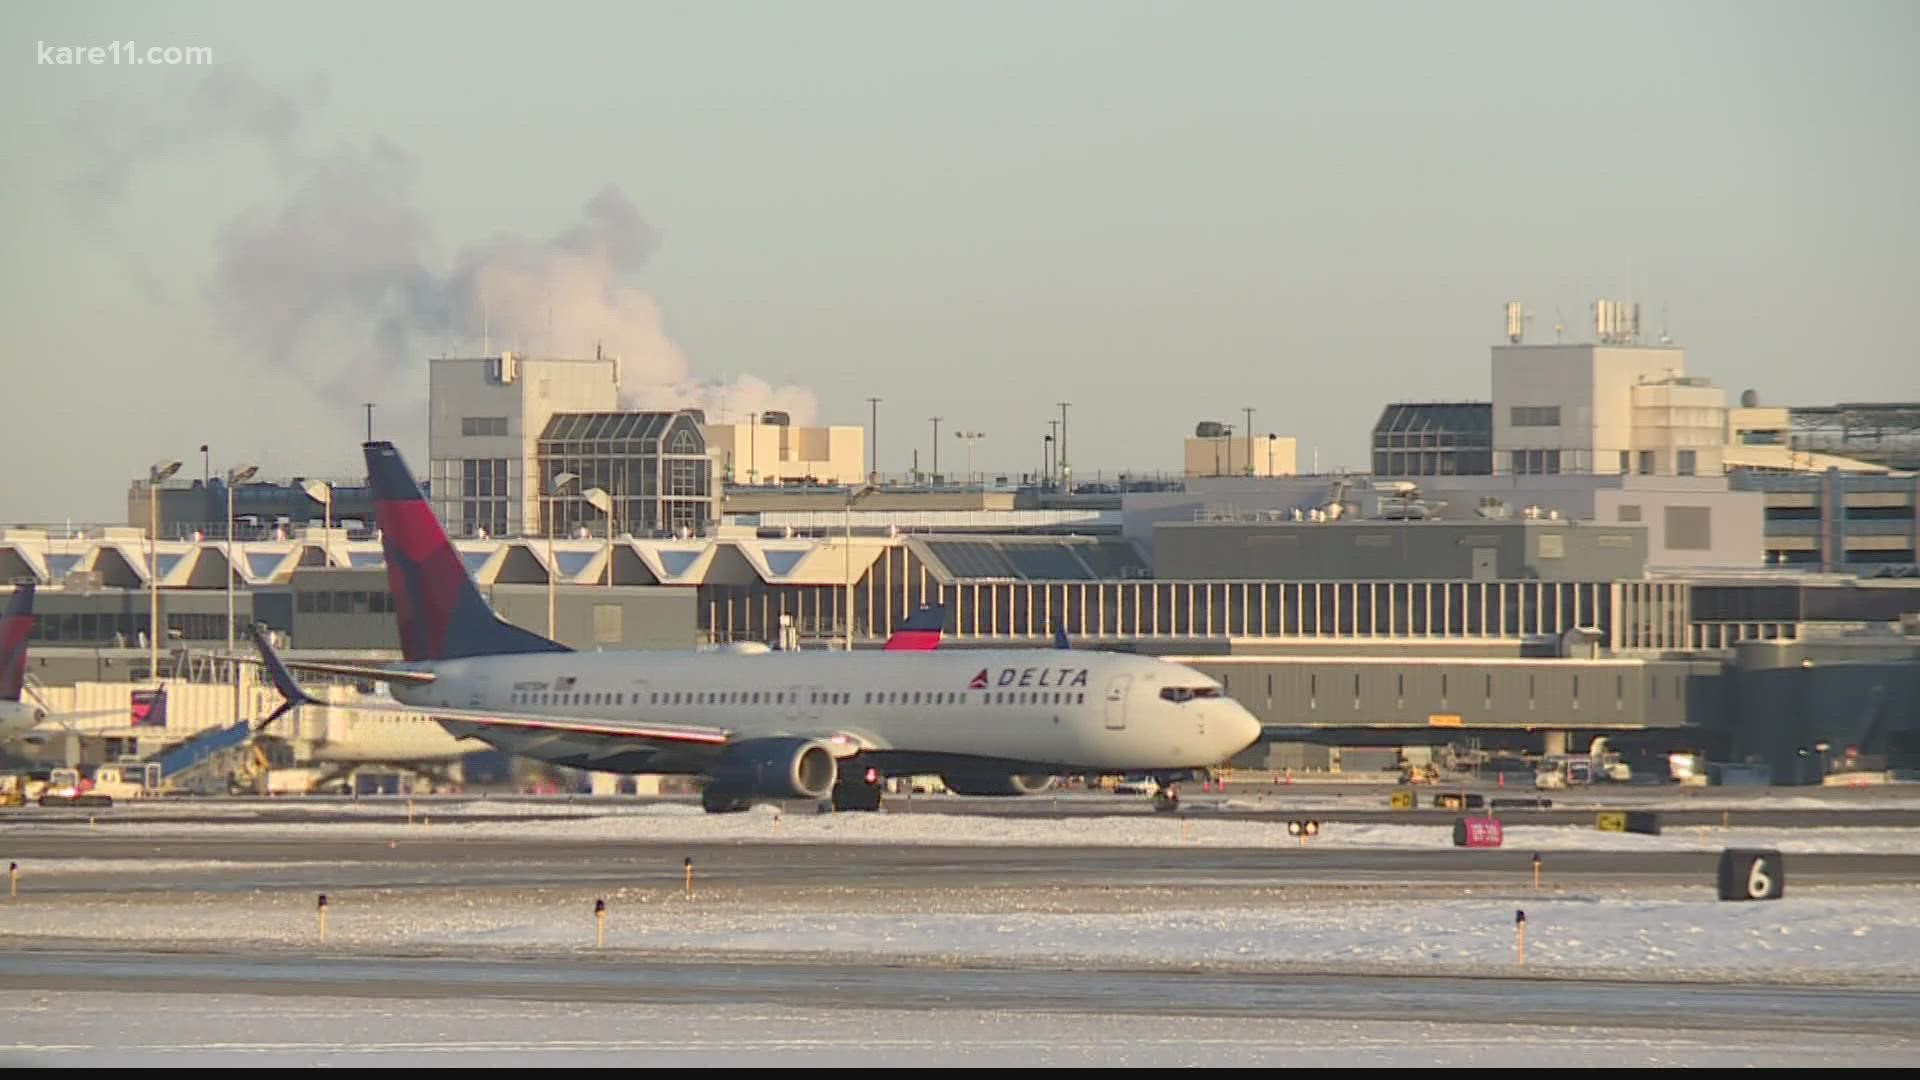 According to MSP International Airport, more than 74 flights were cancelled, and over 121 delayed as of Sunday night.